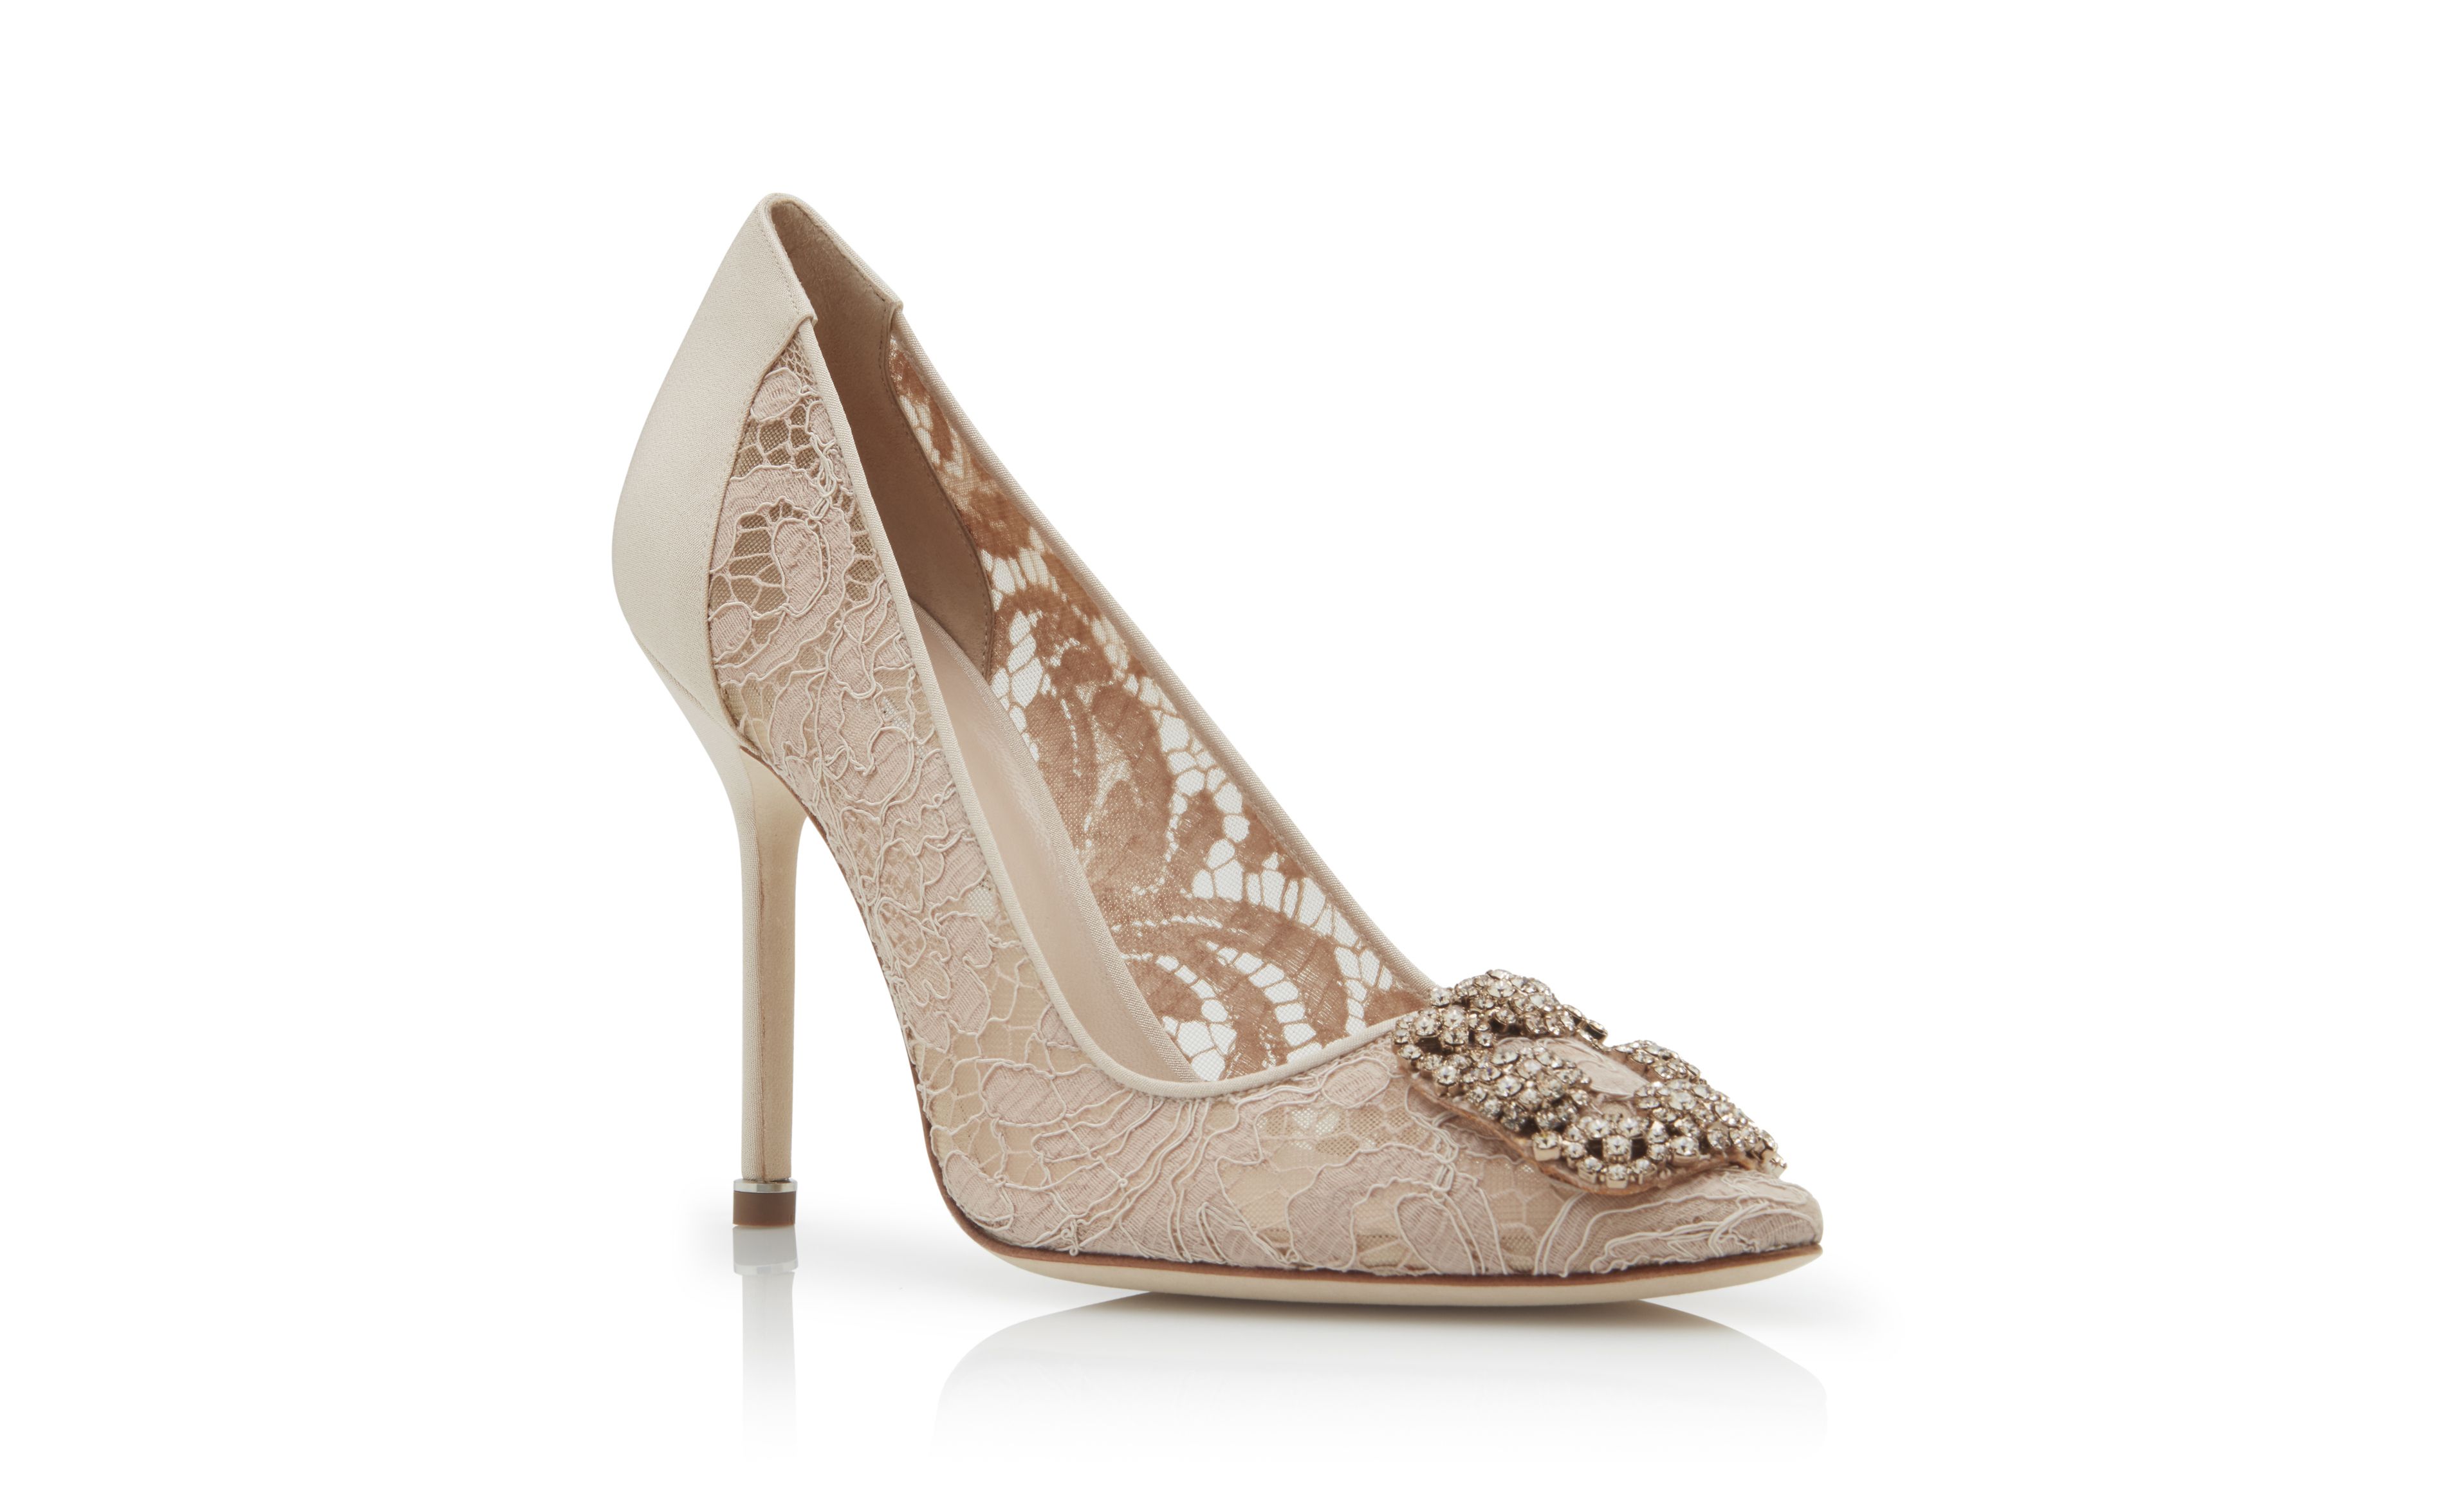 Designer Pink Champagne Lace Jewel Buckle Pumps - Image Upsell